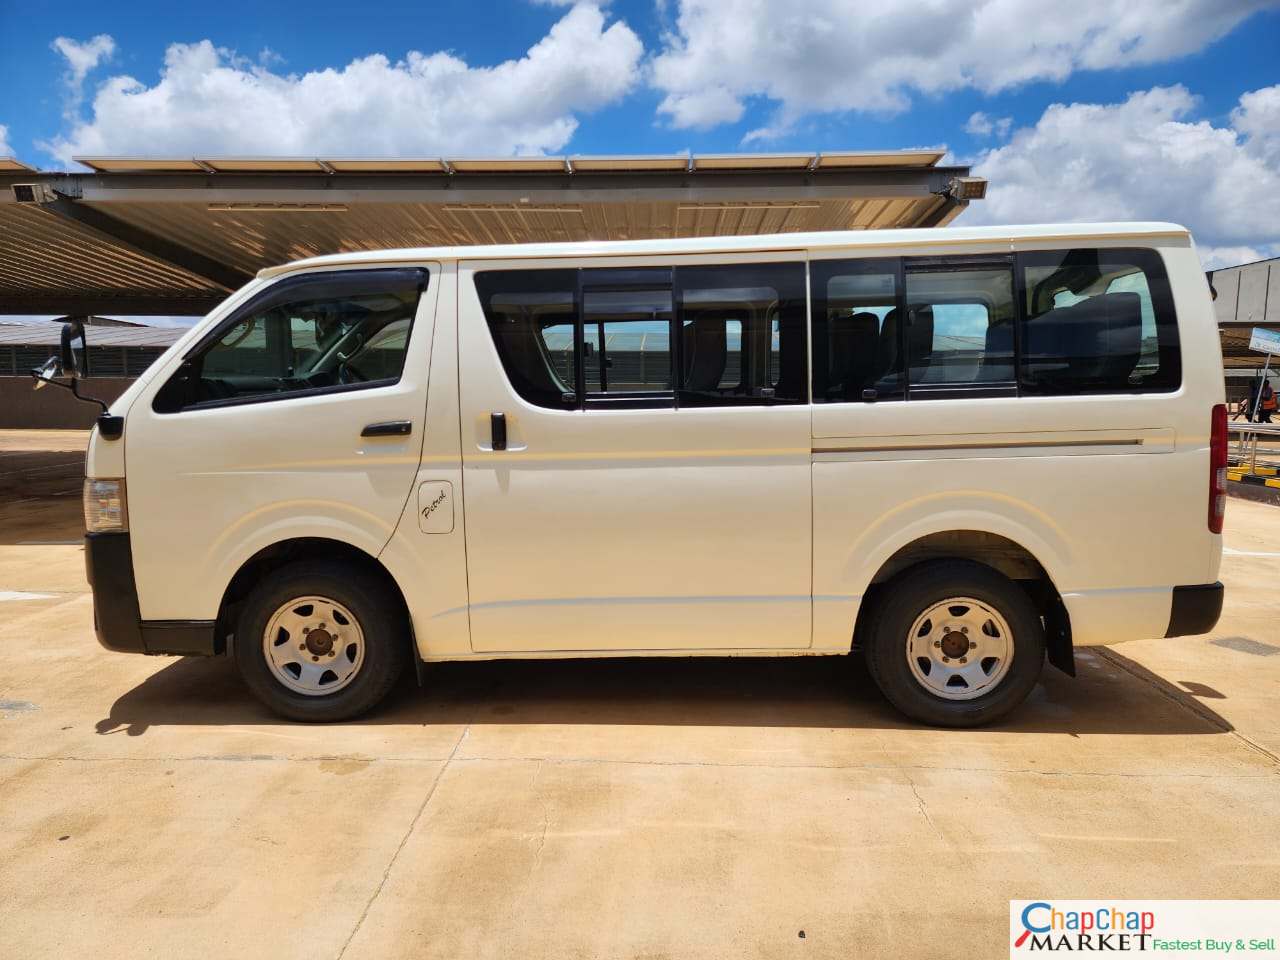 Toyota HIACE 7L 14 SEATER Private You Pay 40% DEPOSIT TRADE IN OK EXCLUSIVE